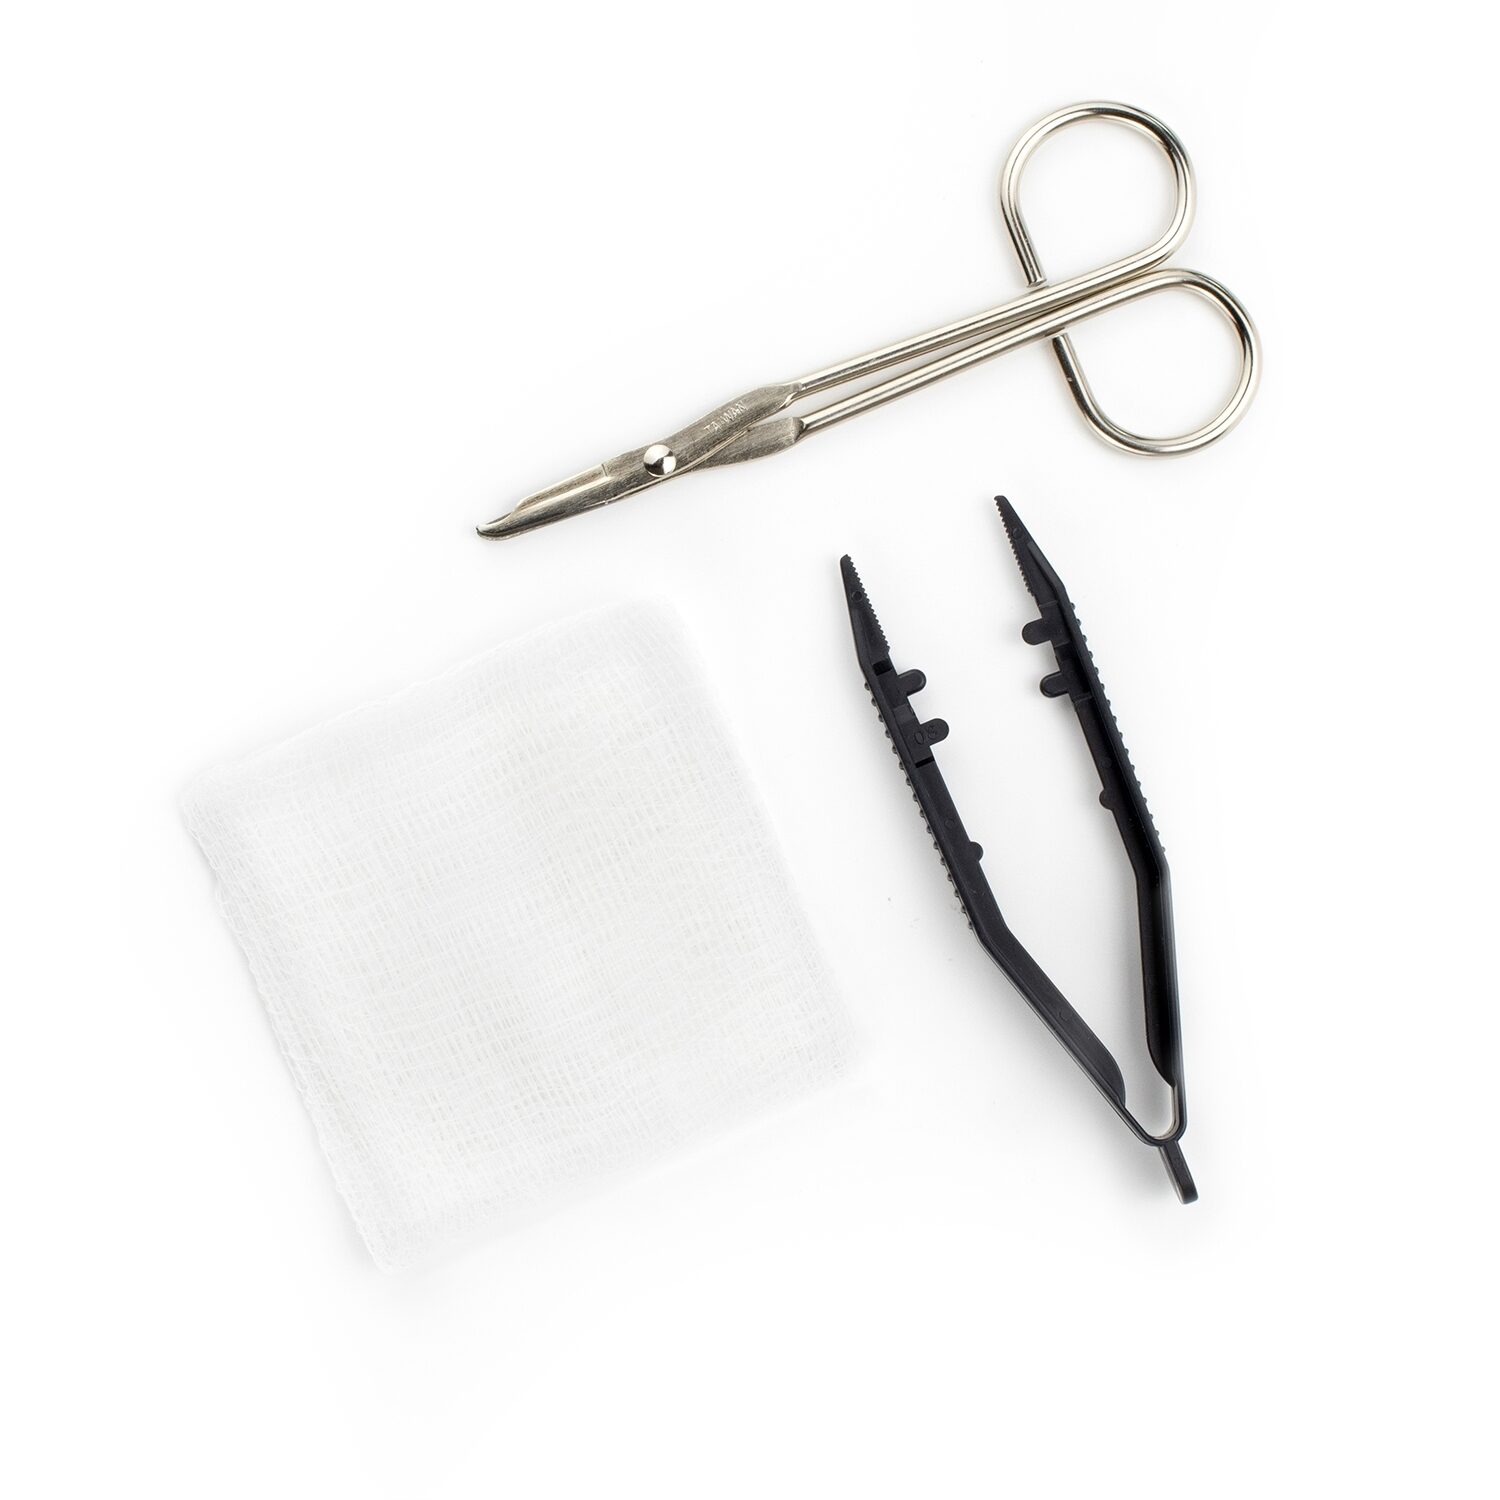 Sterile Suture Removal Kit, Package of 10 disposable kits